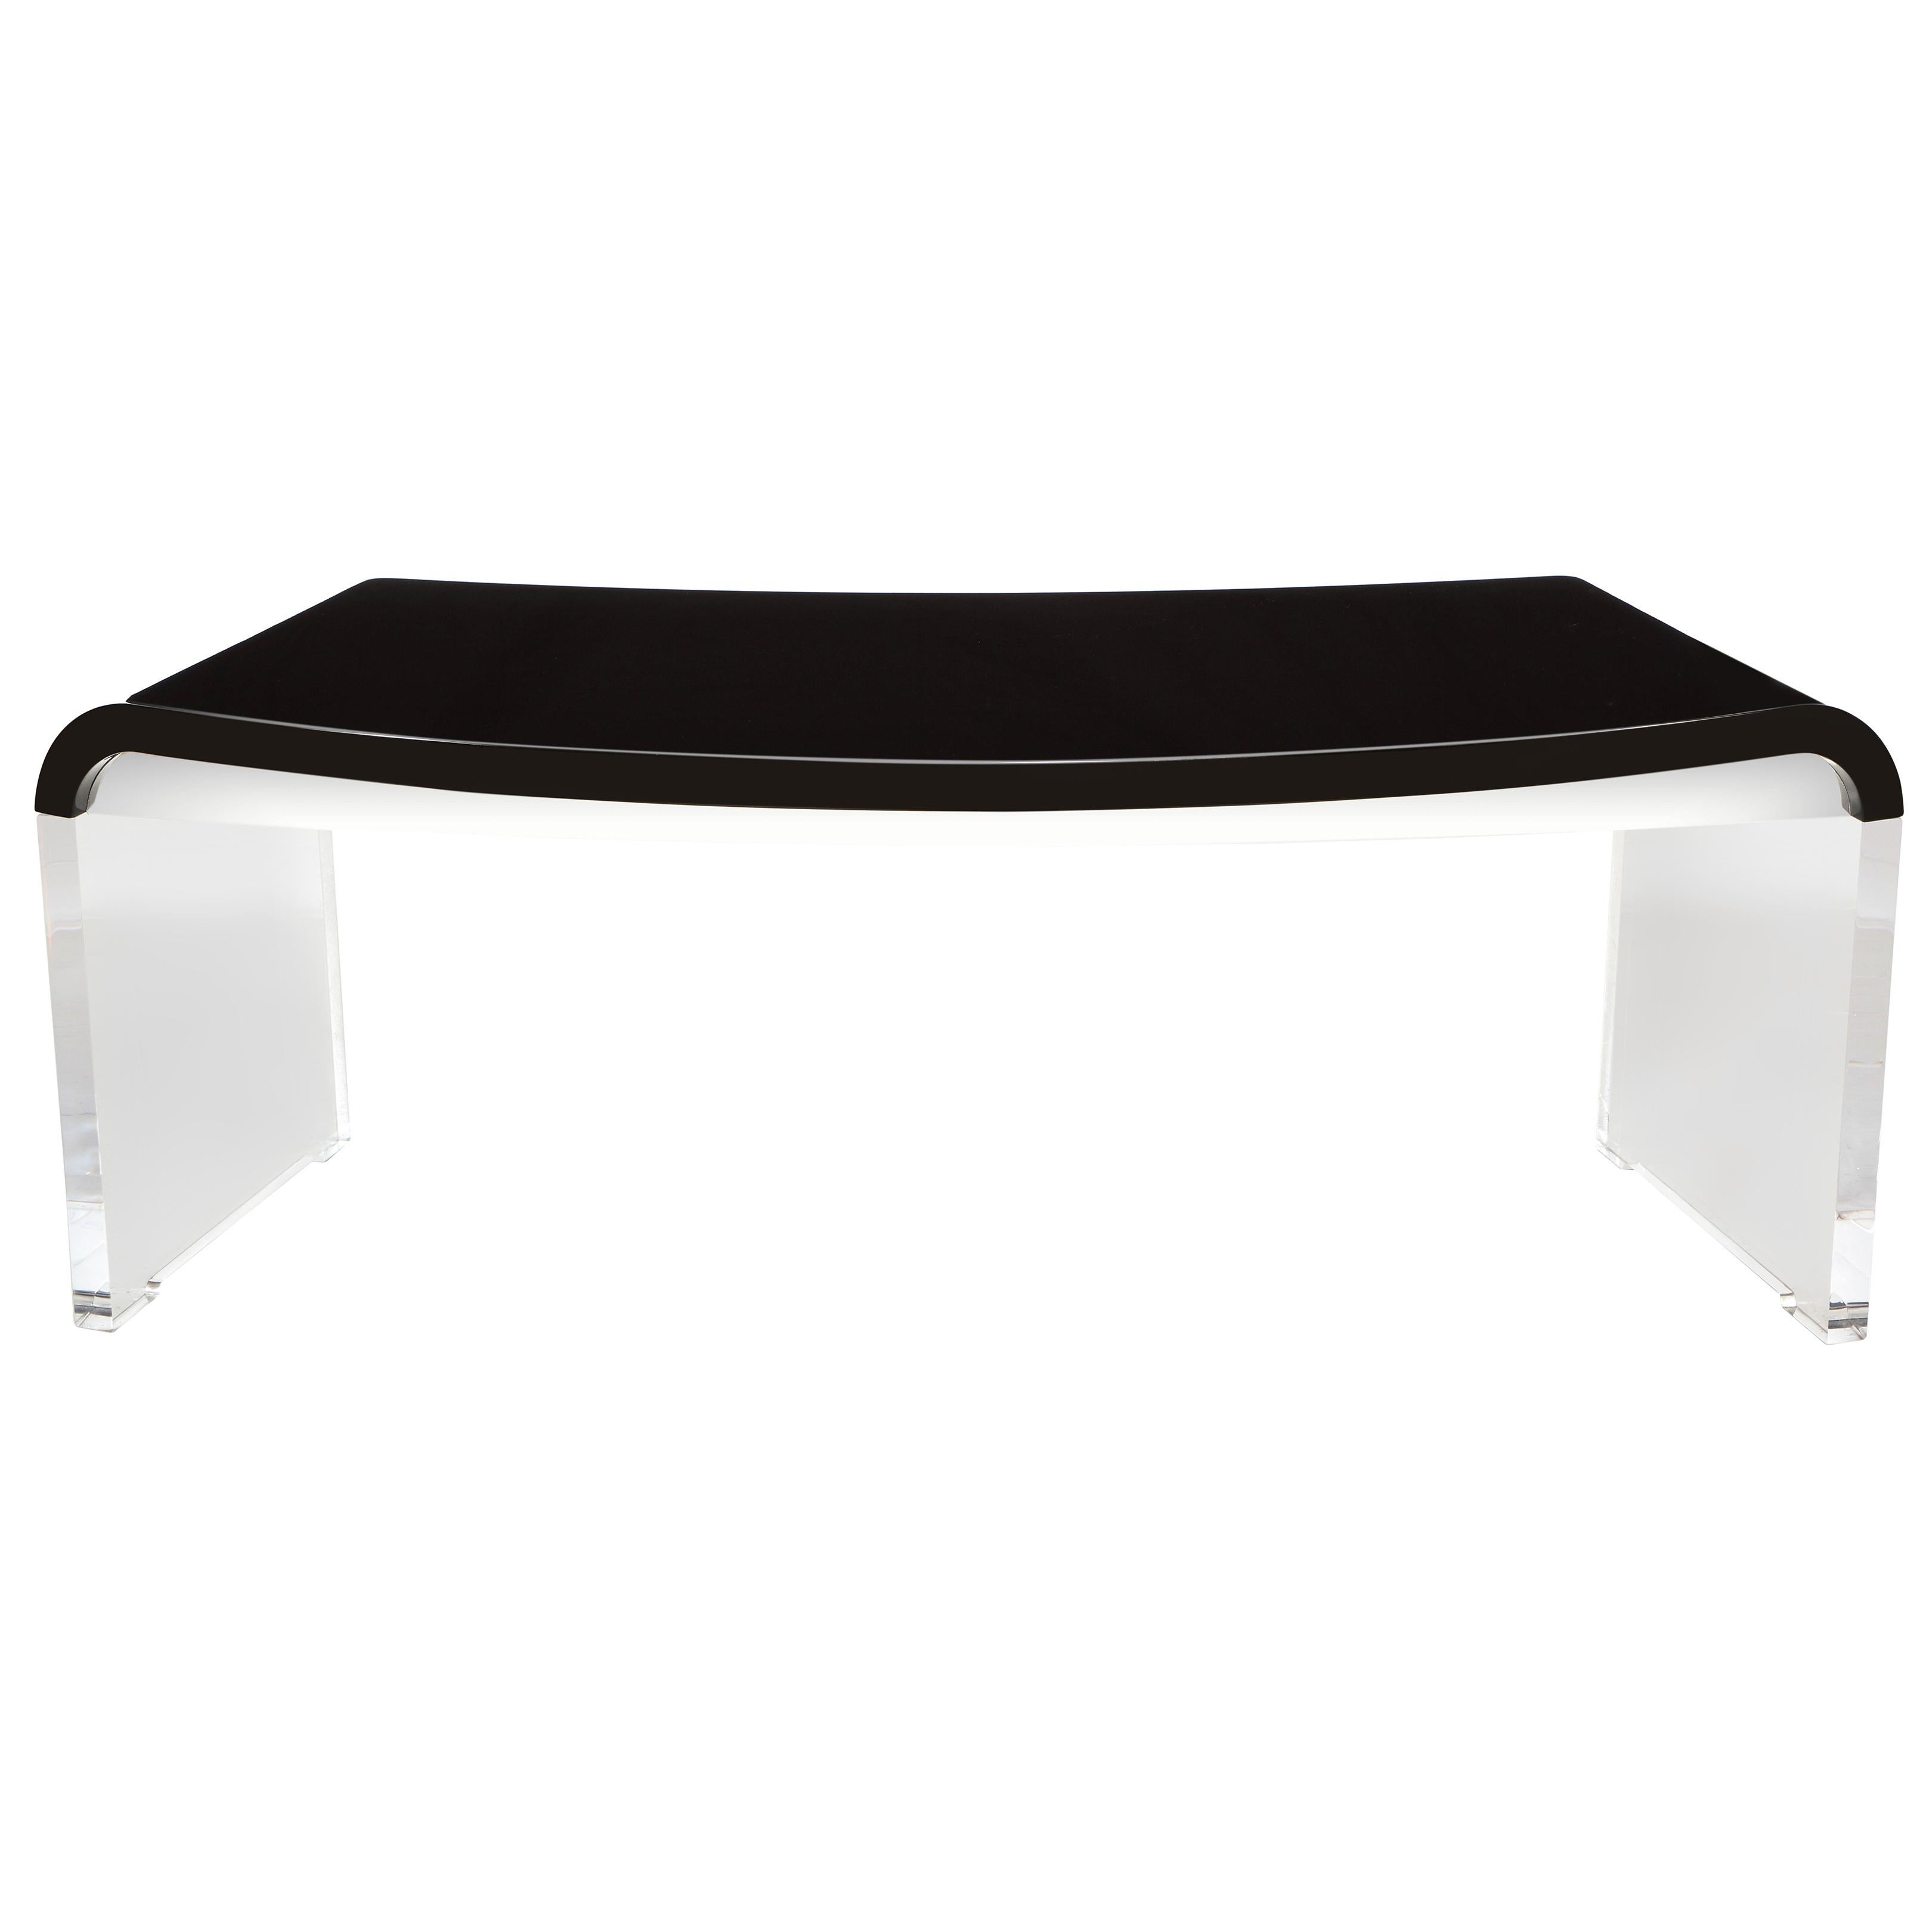 Crescent Desk Black Lacquer & Clear Base Offered by Vladimir Kagan Design Group